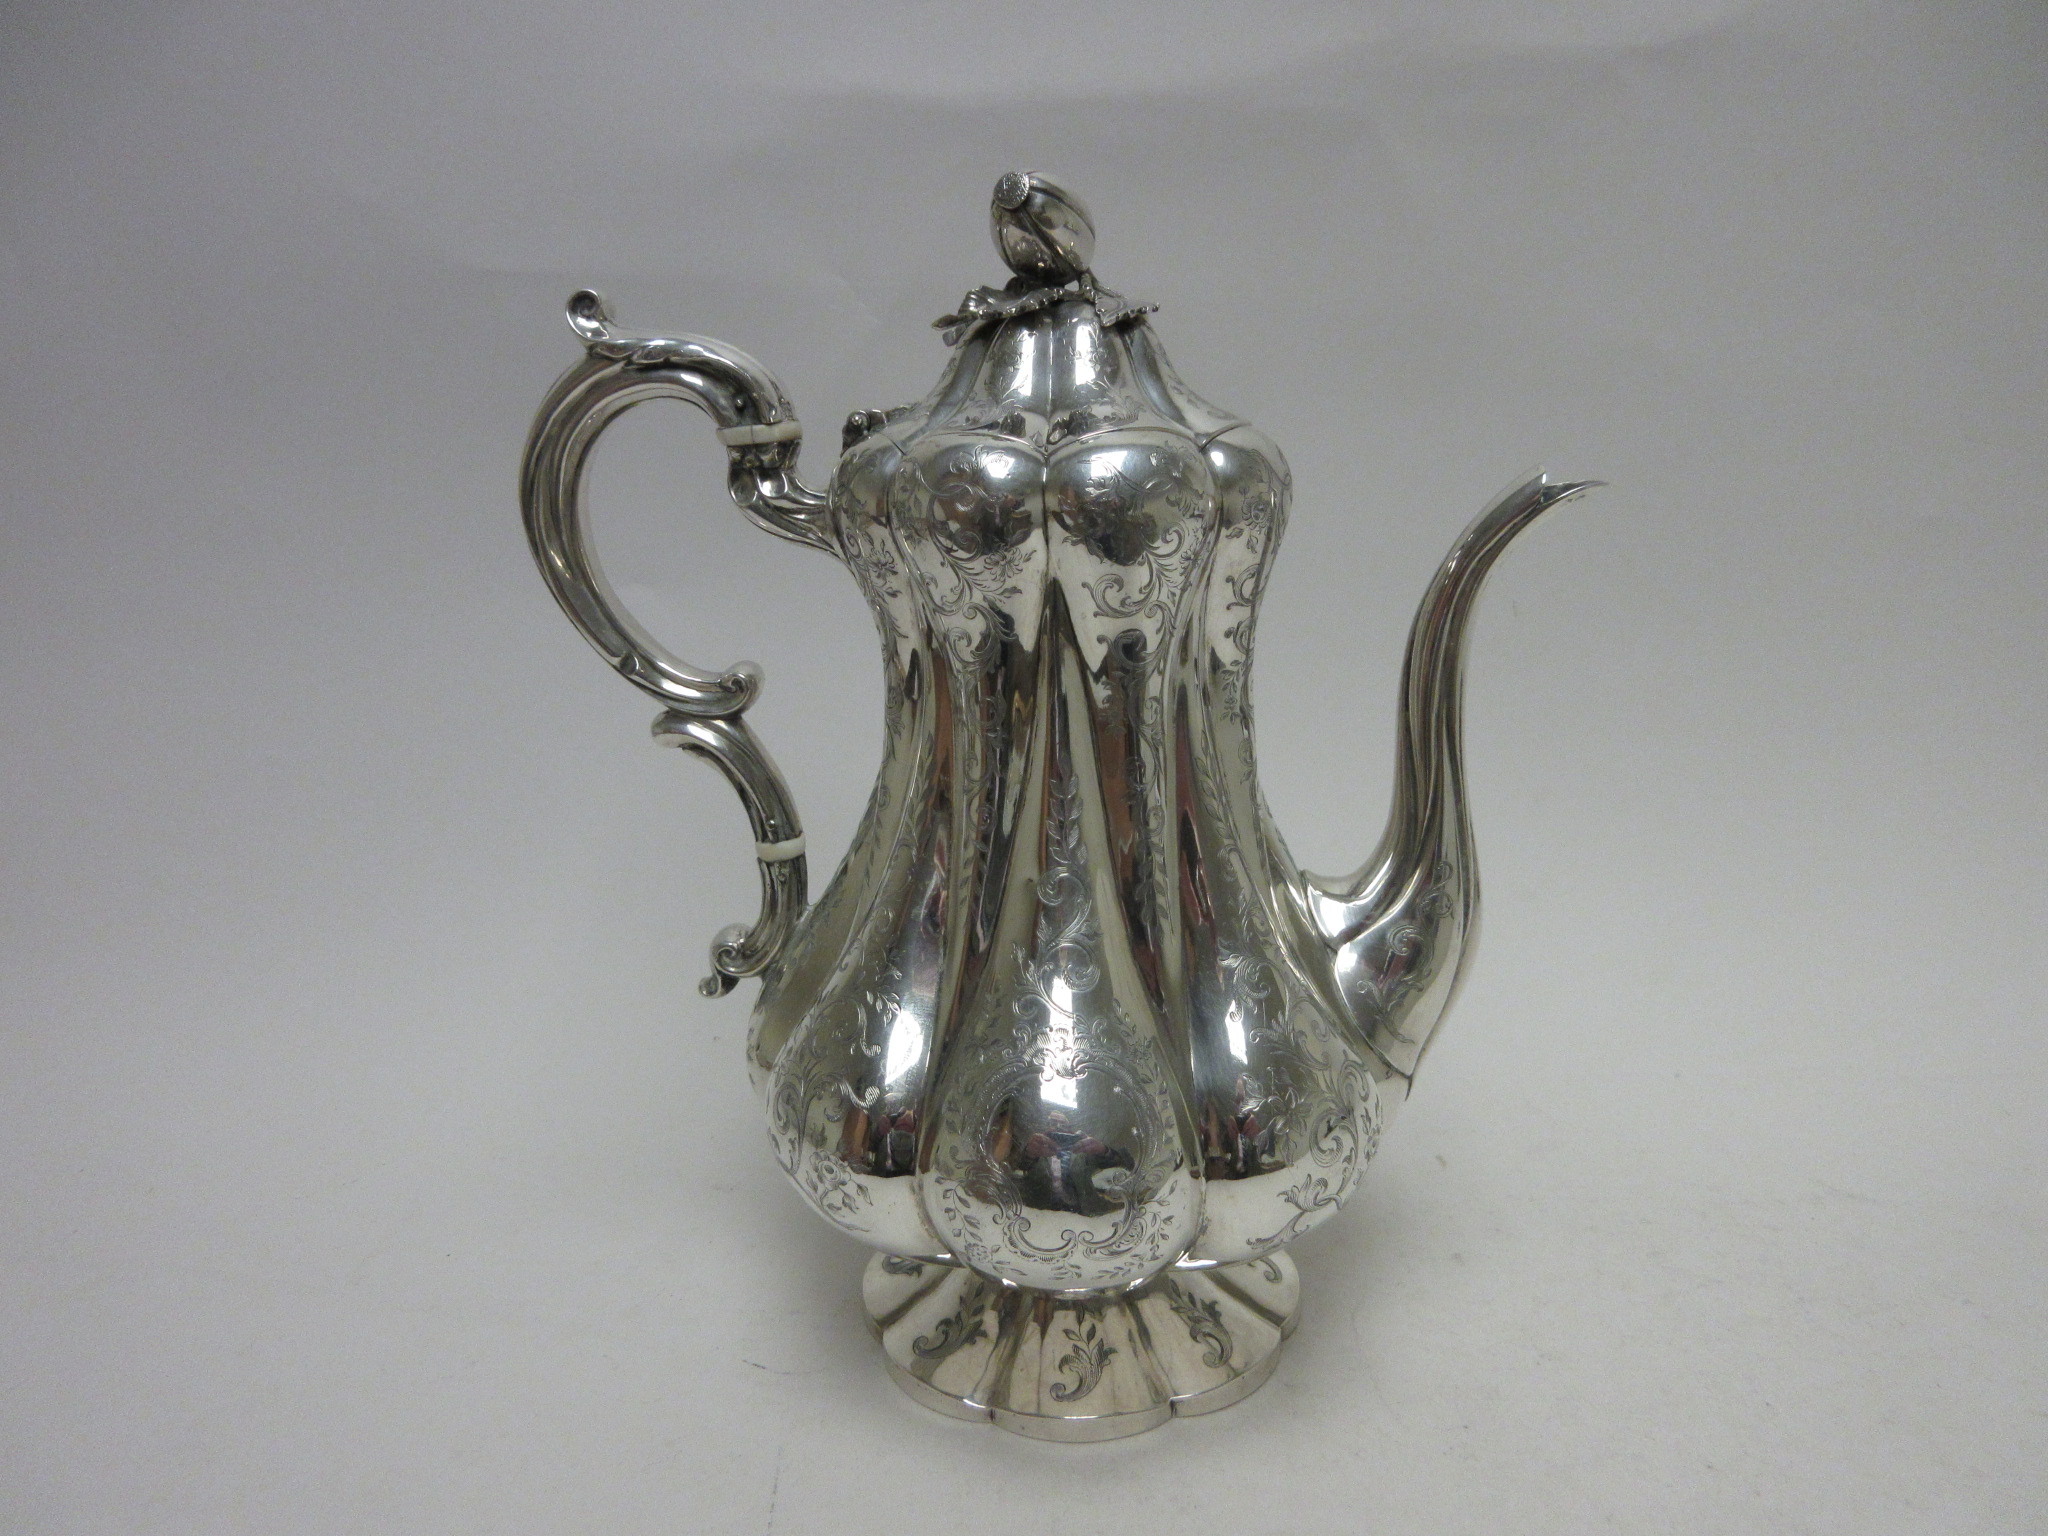 A Victorian silver Coffee Pot of pear shape with leafage scroll engraving, melon finial, London - Image 7 of 7